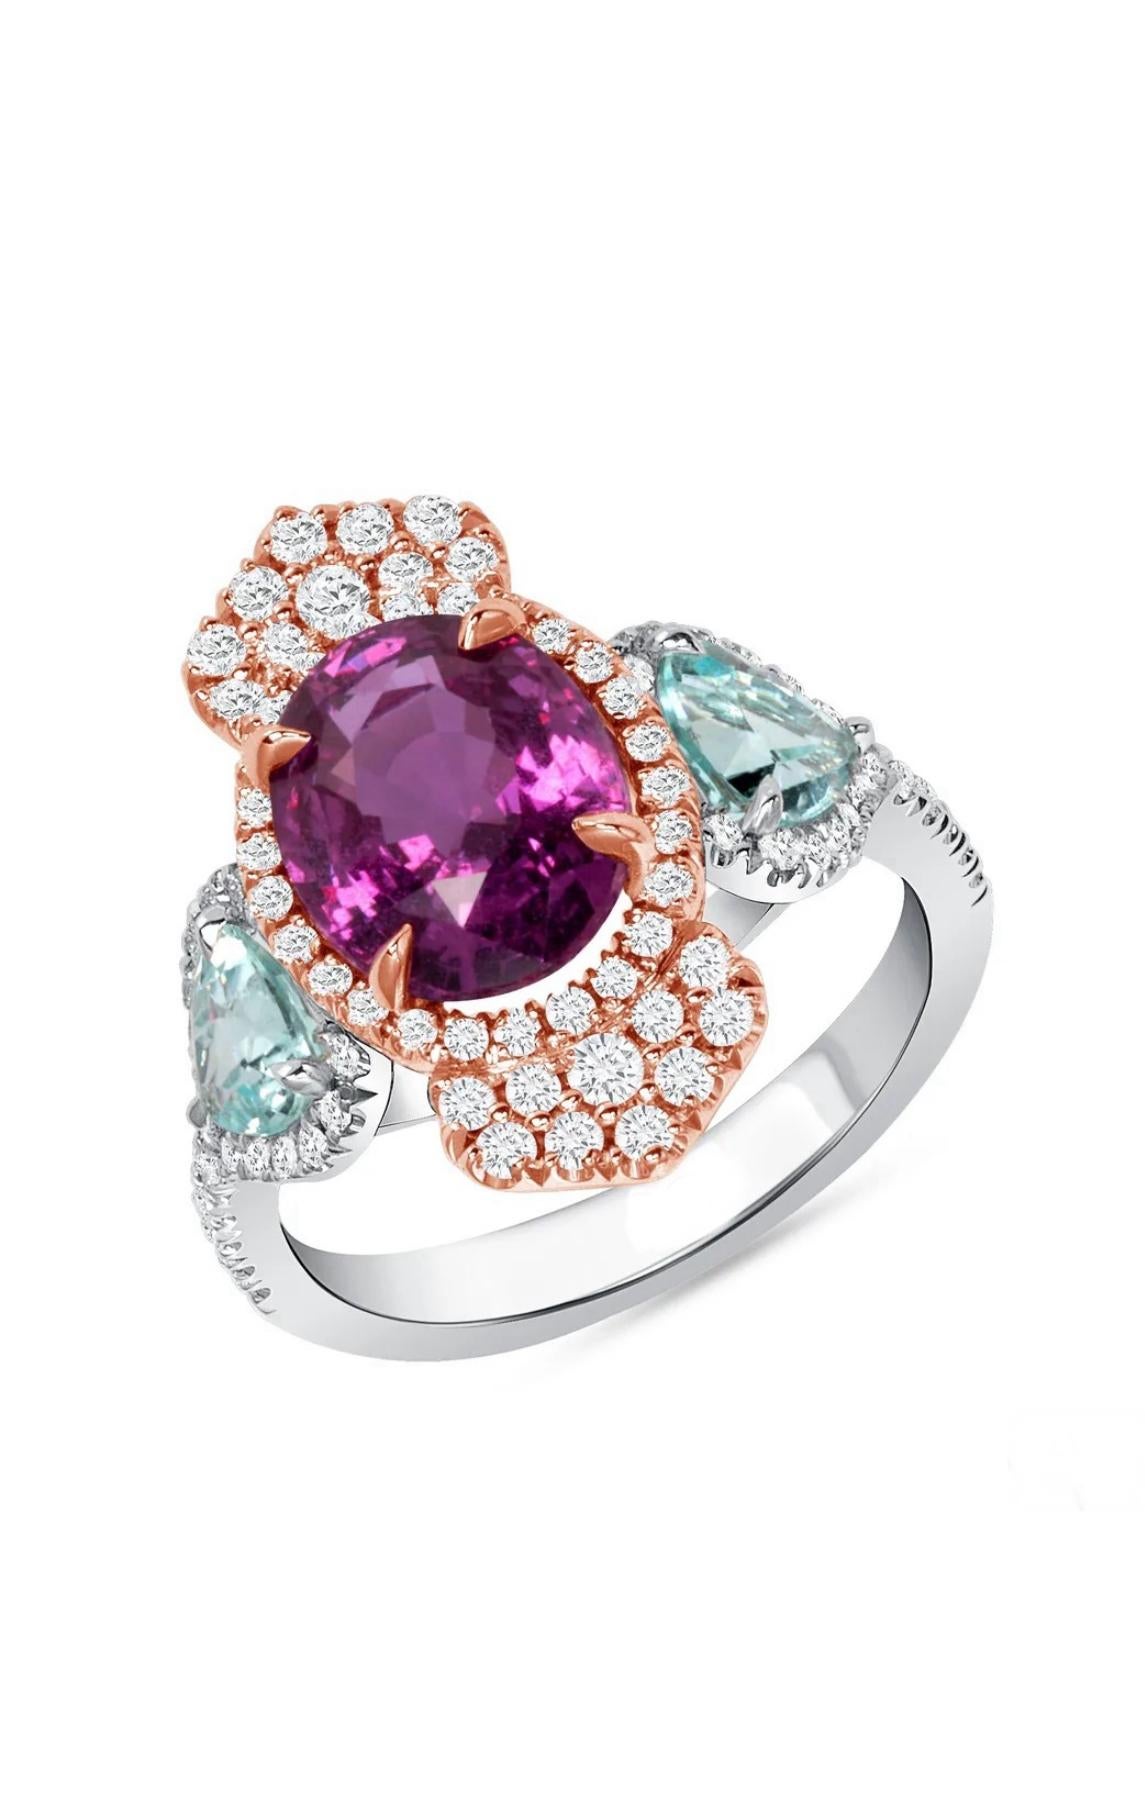 A 4.03ct, Boysenberry Sapphire from Sri Lanka is set with two 0.82ct Paraiba Tourmalines from Mozambique, accented by white diamonds totaling 0.56cts in this beauteous 18K white with rose gold ring. The boysenberry Sapphire is GIA certified, taking